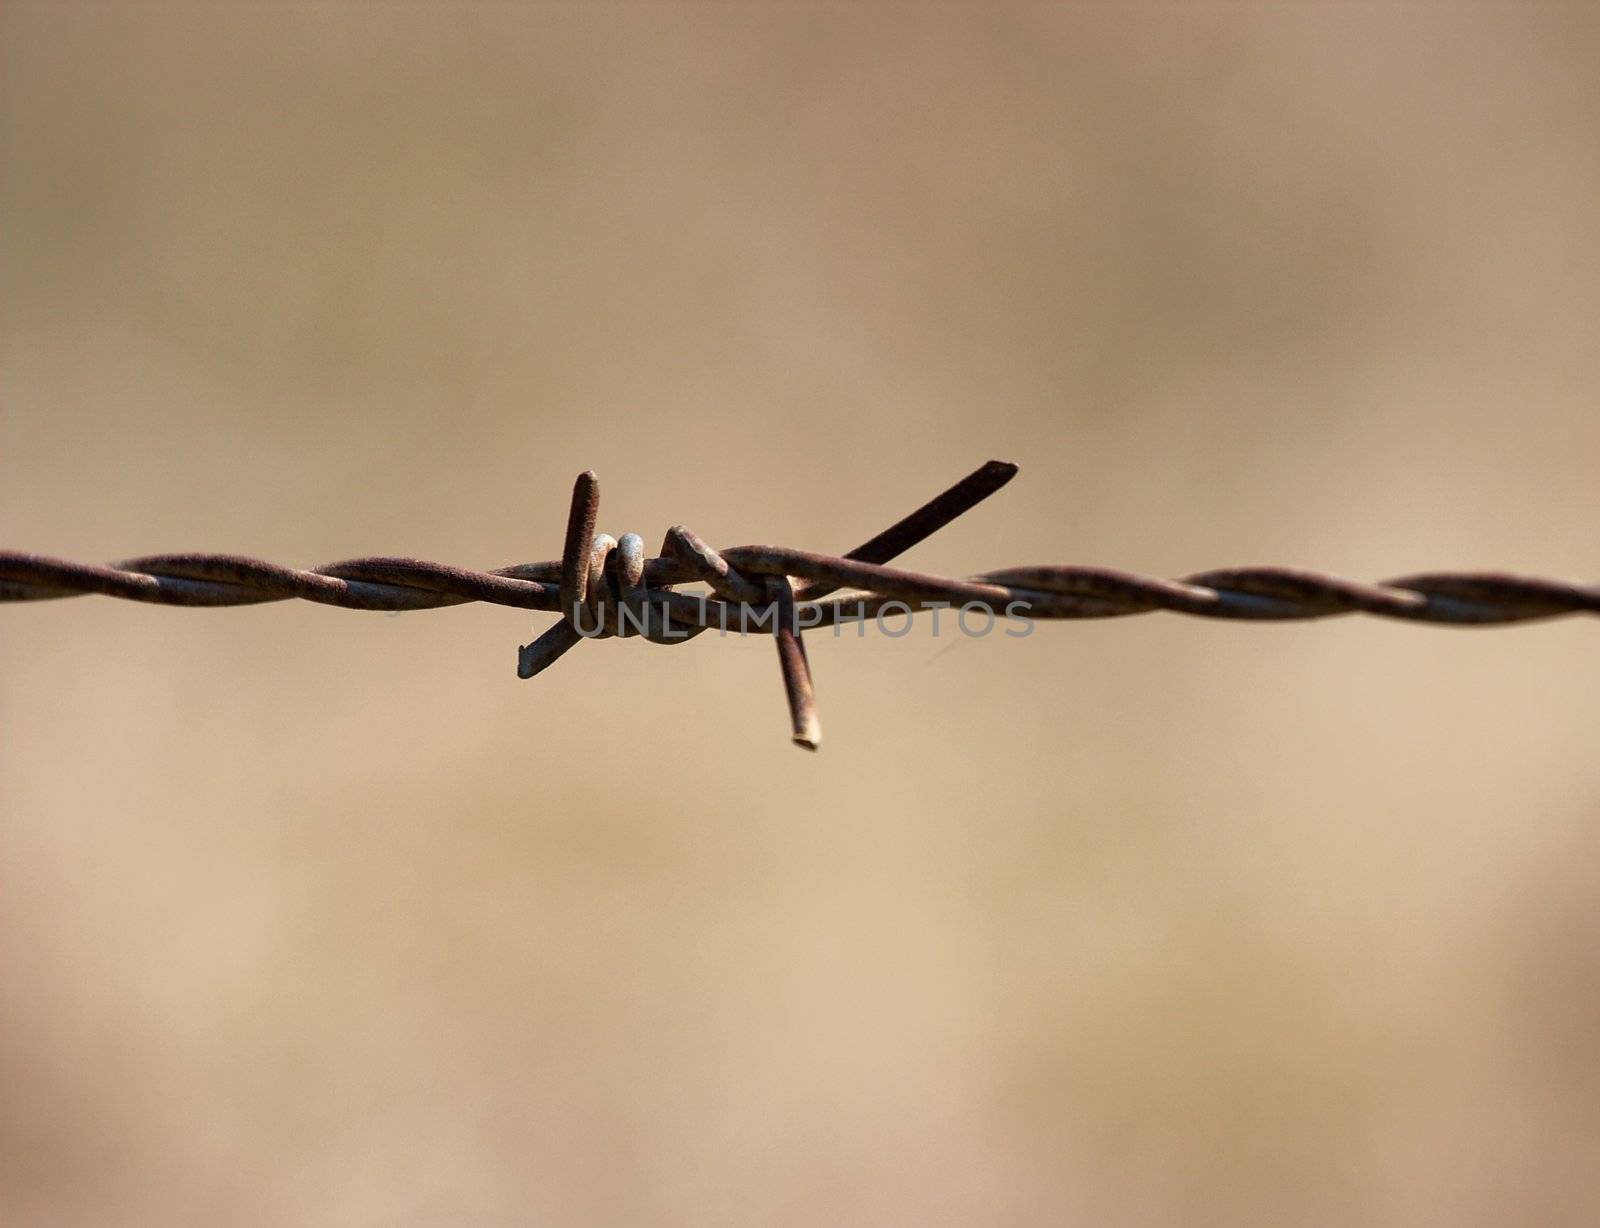 Barbed wire fence closeup with small DOF